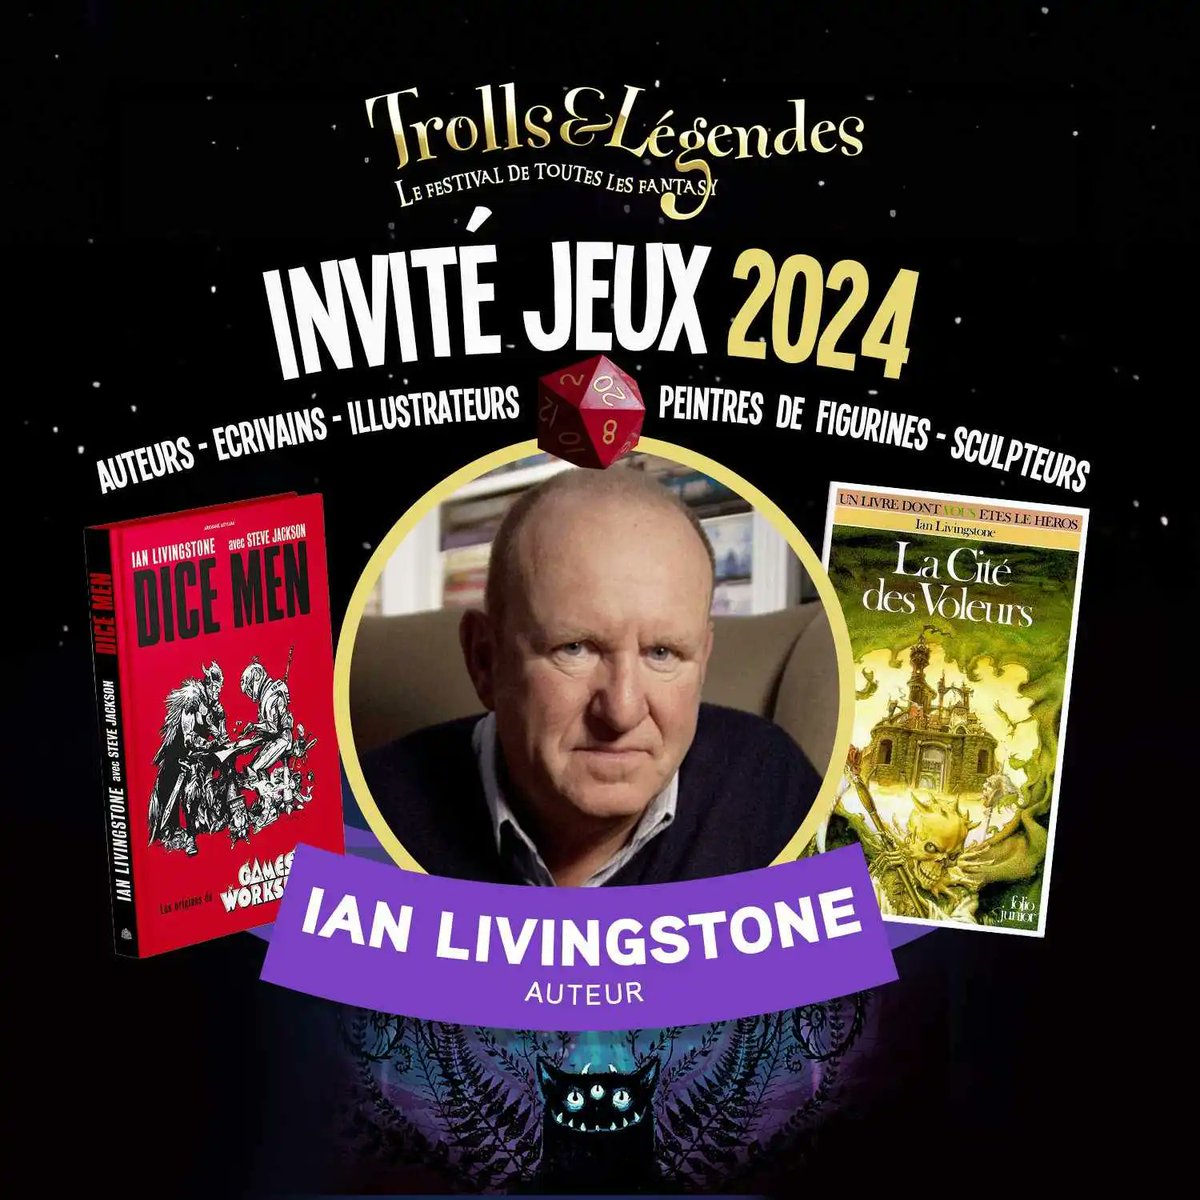 Looking forward to attending Trolls & Legendes as a Guest of Honour in Mons, Belgium on 30th and 31st March. I'll be signing Dice Men and @fightingfantasy books (un livre dont vous êtes le héros) @TrollsLegendes @GallimardJeun trollsetlegendes.be/programme/jeux/